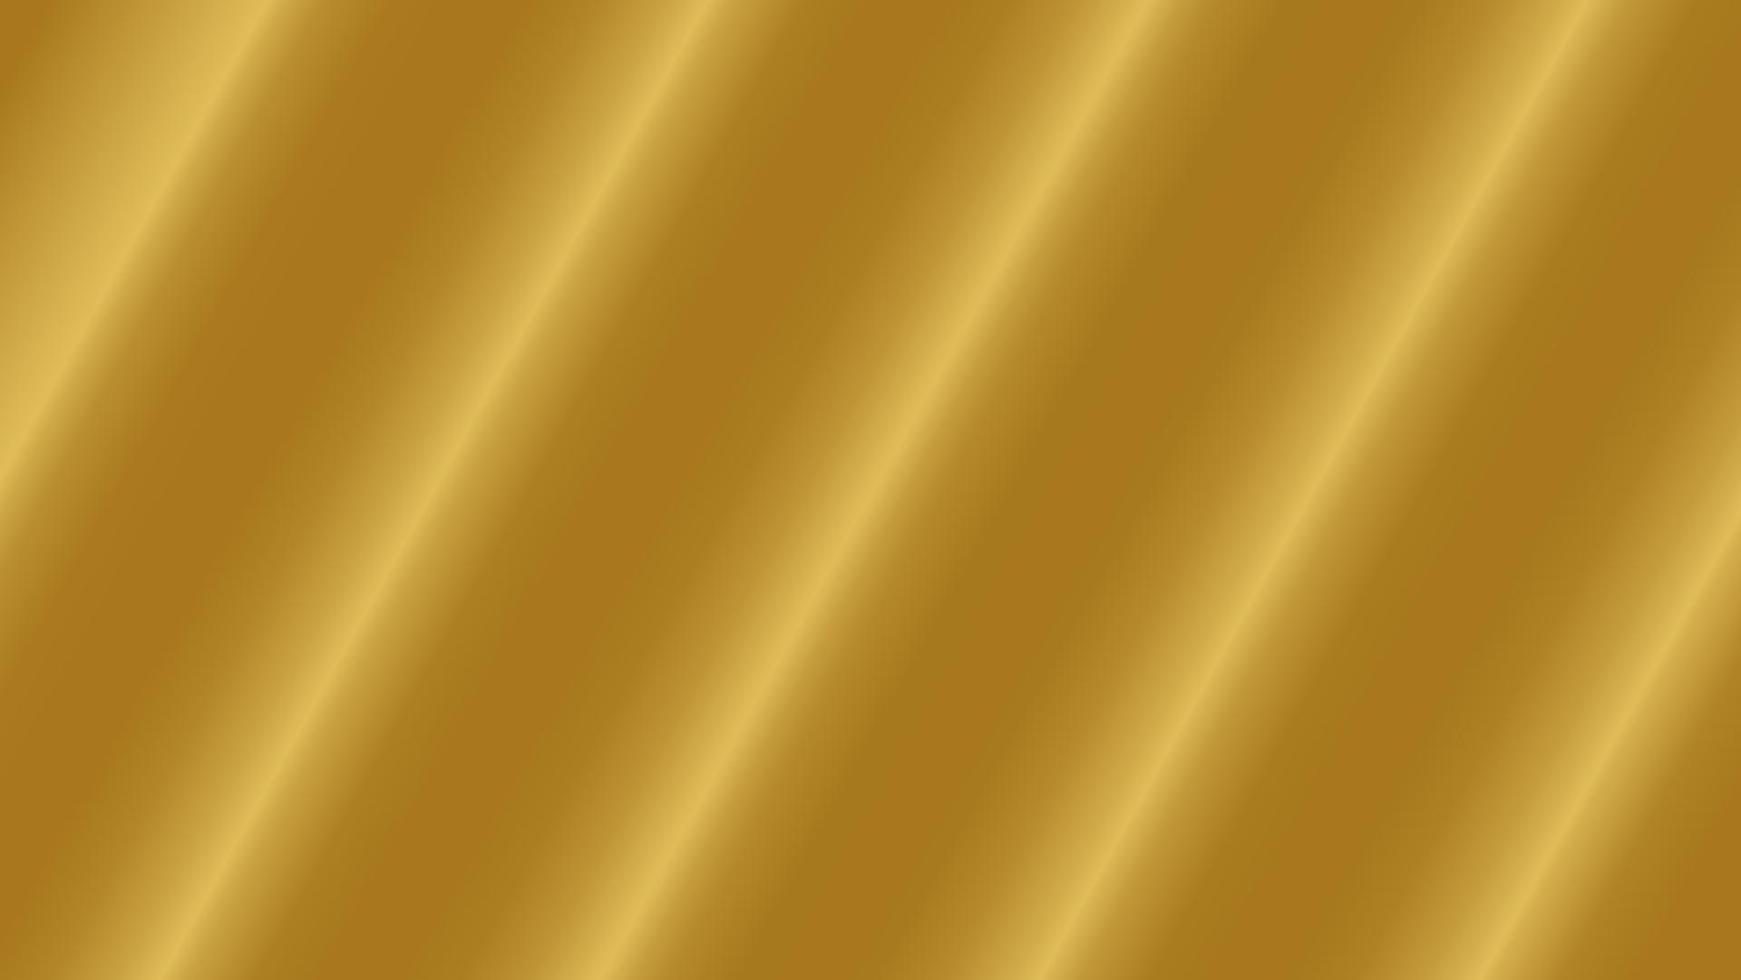 gold gradient color background. shiny metallic texture with smooth surface for graphic design element vector